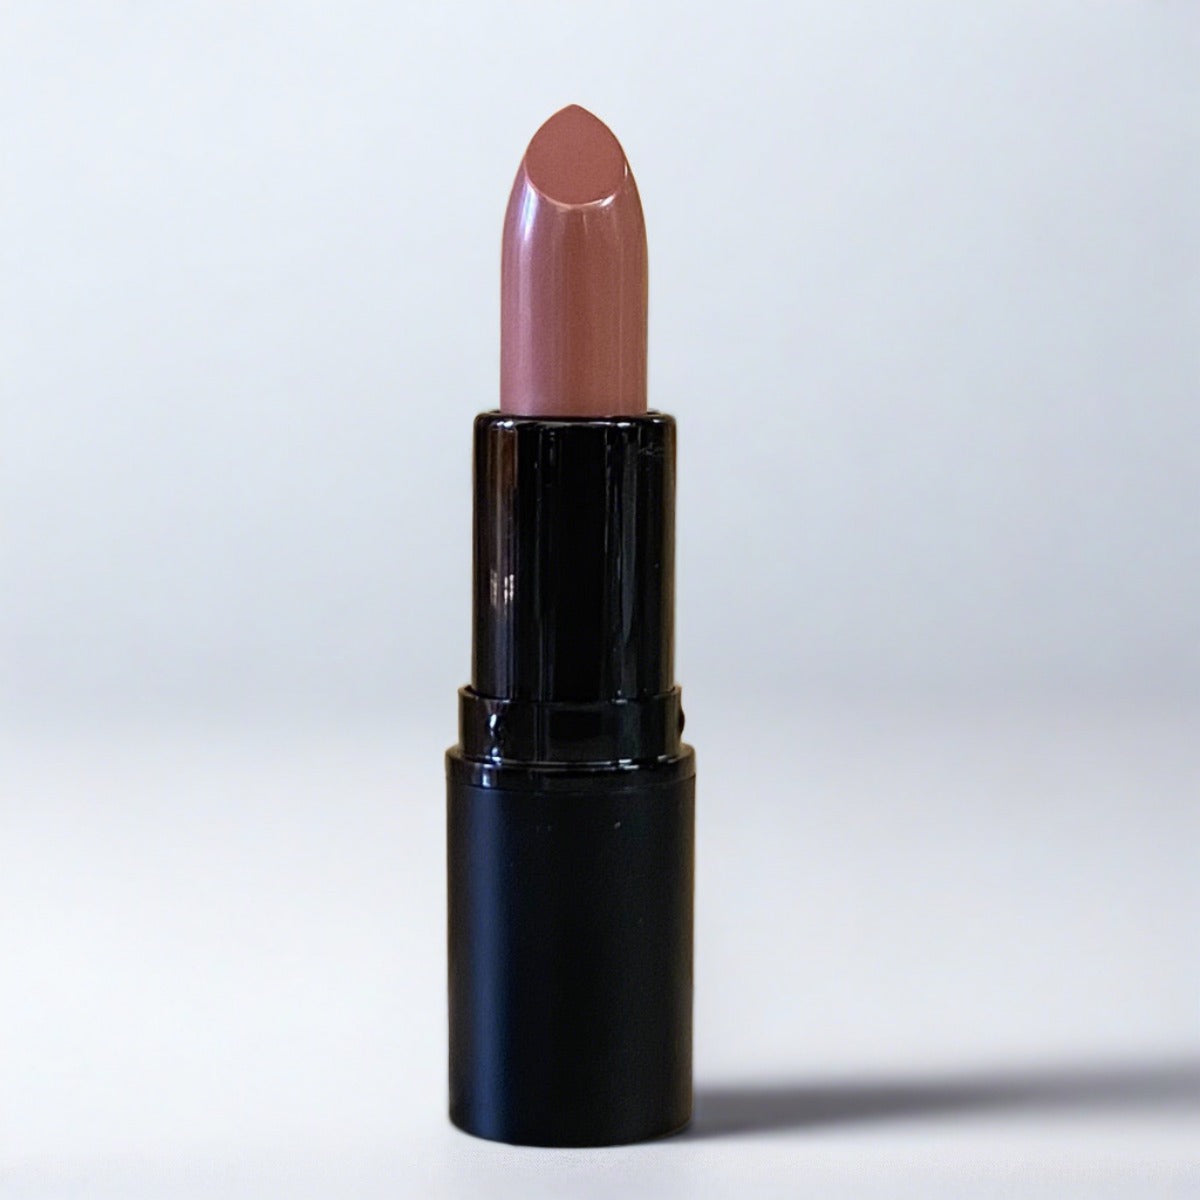 Swatch of Tranquil Lipstick, a misty mauve, barely there color